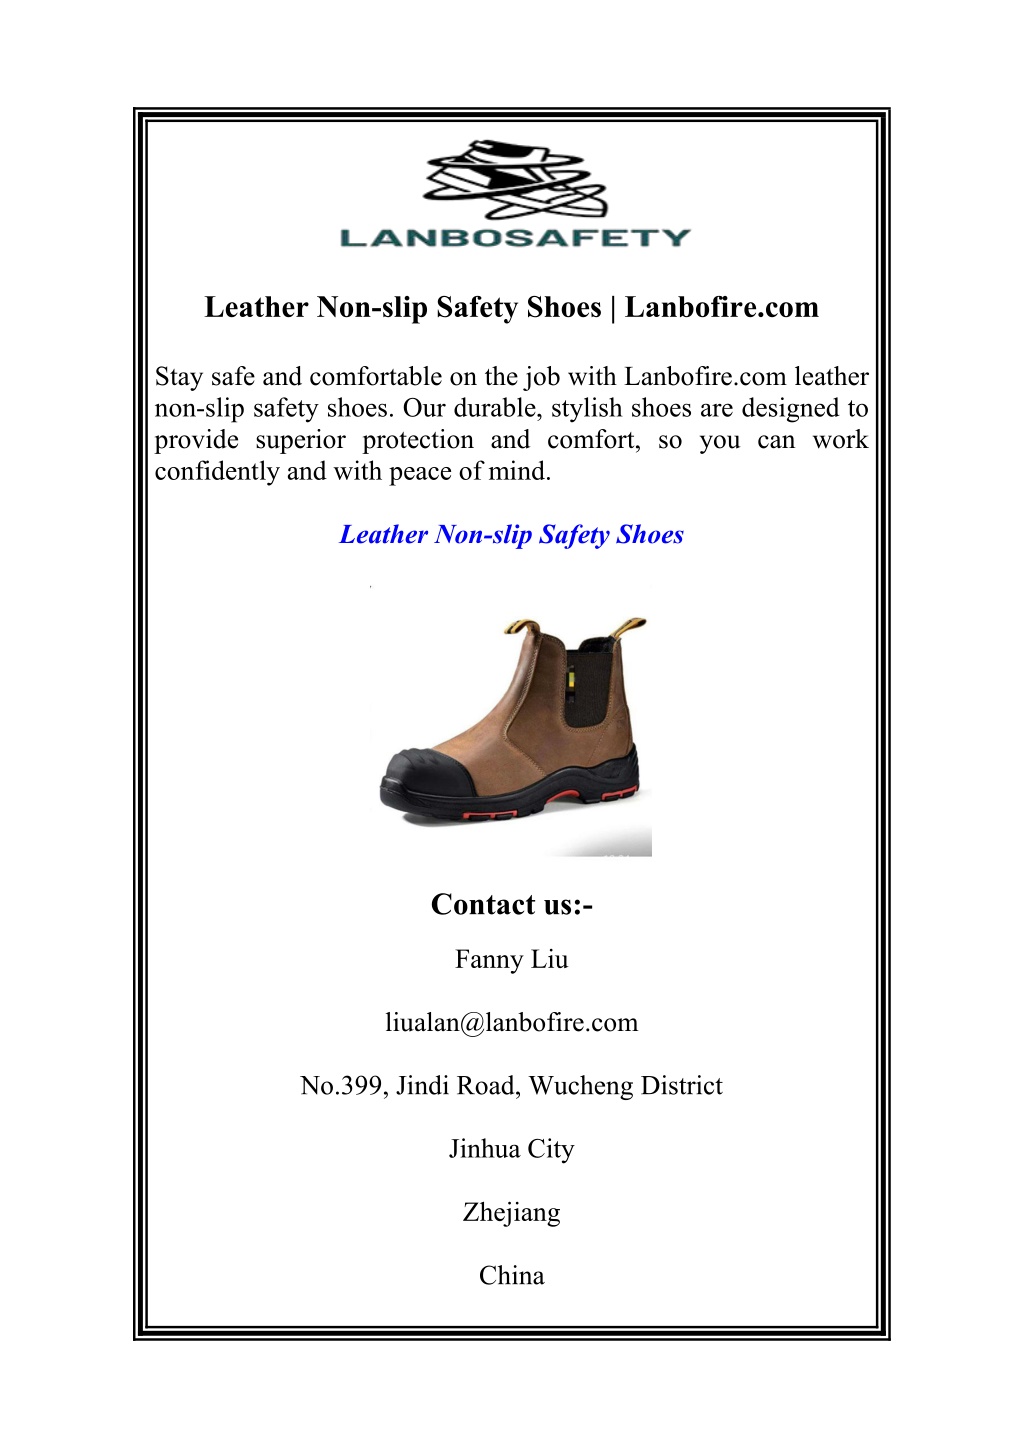 PPT - Leather Non-slip Safety Shoes Lanbofire.com PowerPoint ...